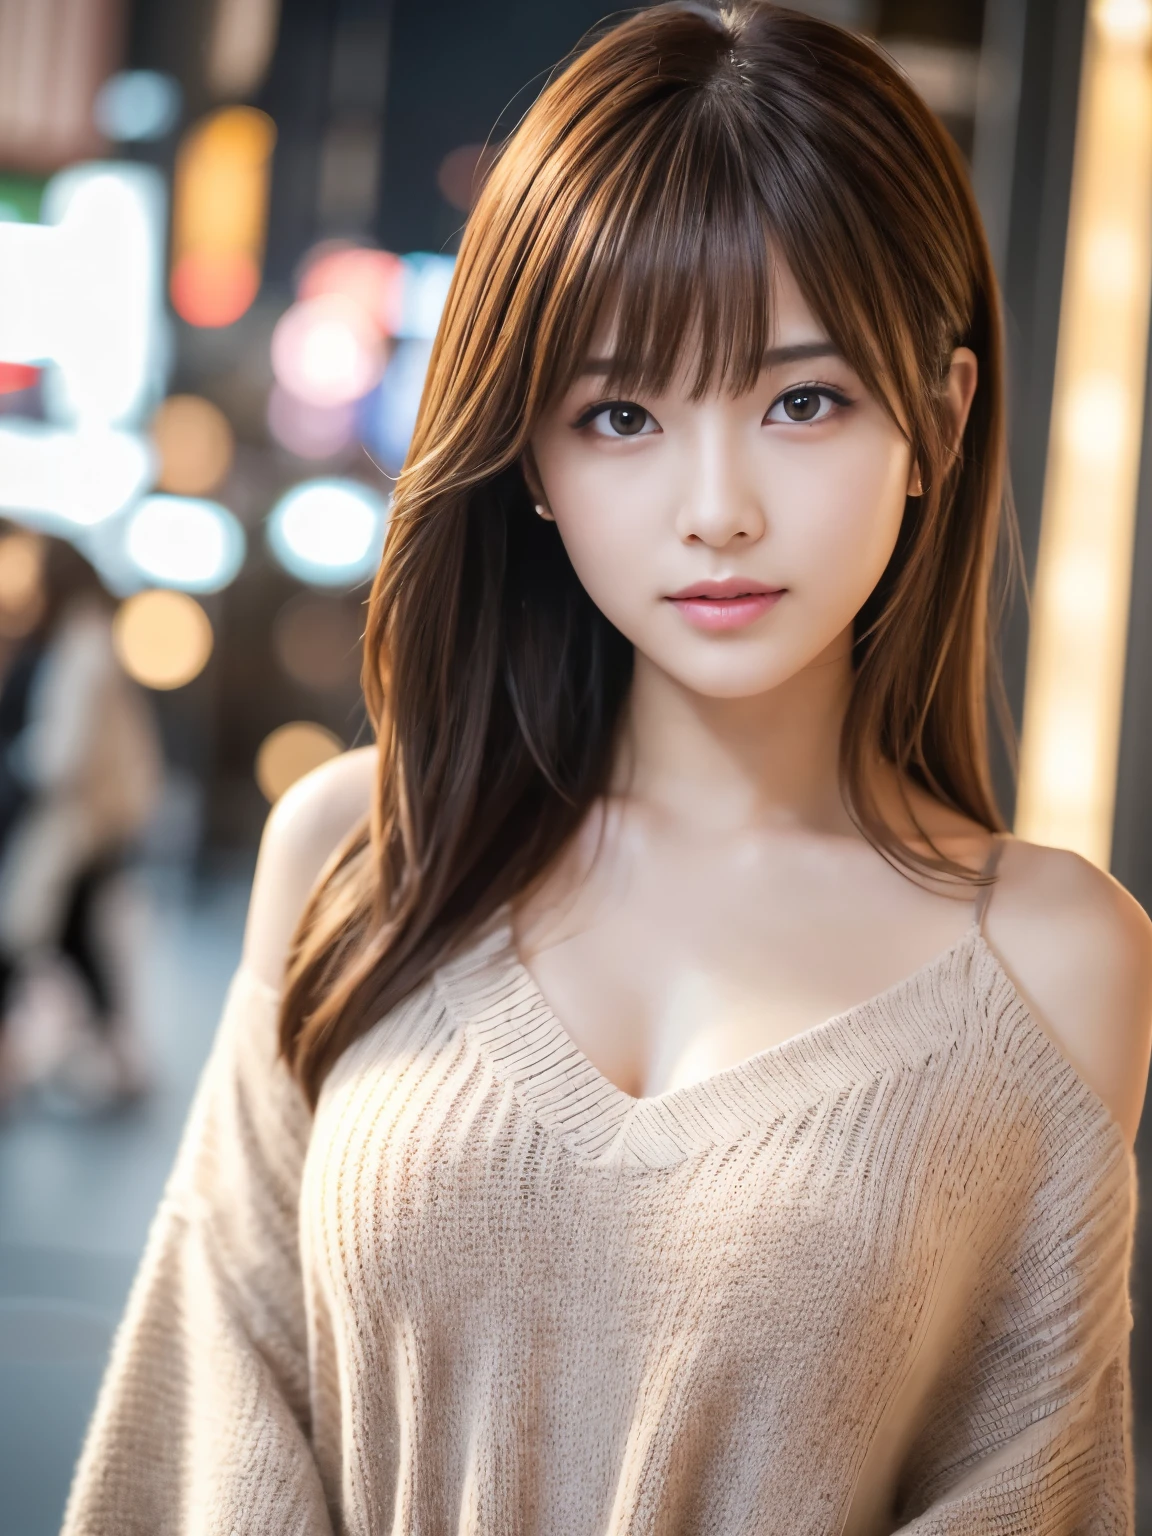 Ultra High Definition, Superior Quality, Premier Quality, ultra detailed, Photorealistic, 8k, RAW Photos, highest quality, masterpiece, Attractive girl, Stunning girl, Brown Hair, Shoulder Length Layered, asymmetrical bangs, Japanese Idol, Sophisticated, Stylish, v-neck knit, Shibuya, Great Joy